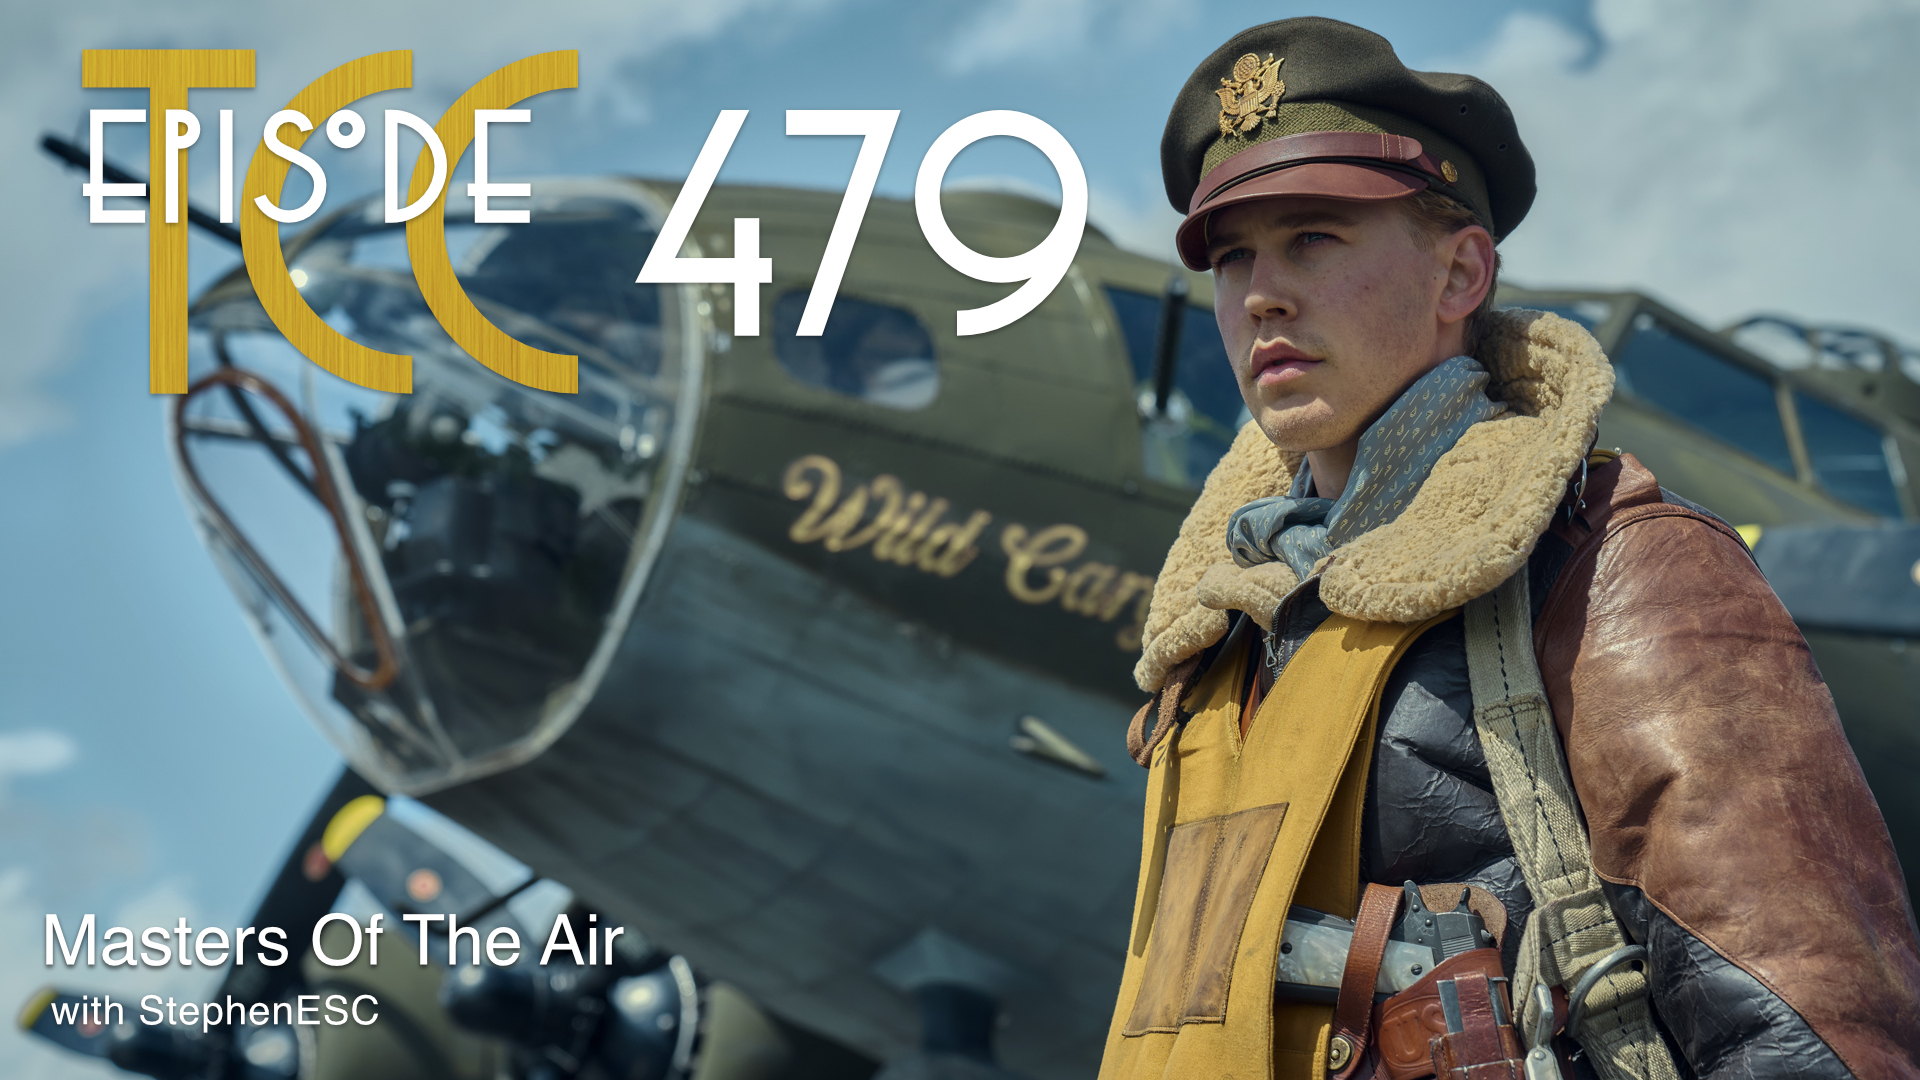 The Citadel Cafe 479: Masters Of The Air